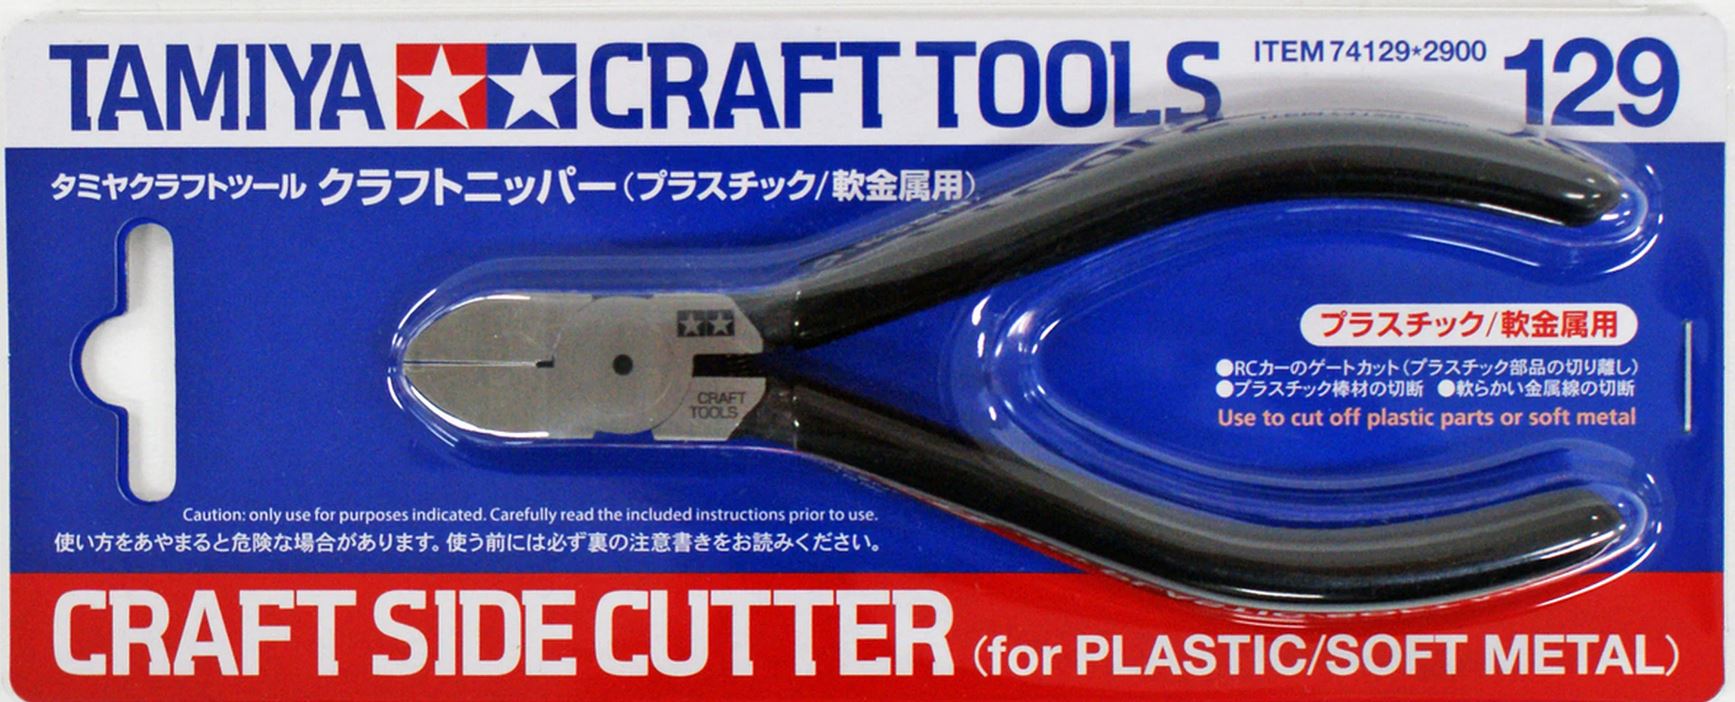 Craft Side Cutter (for Plastic/Soft Metal)